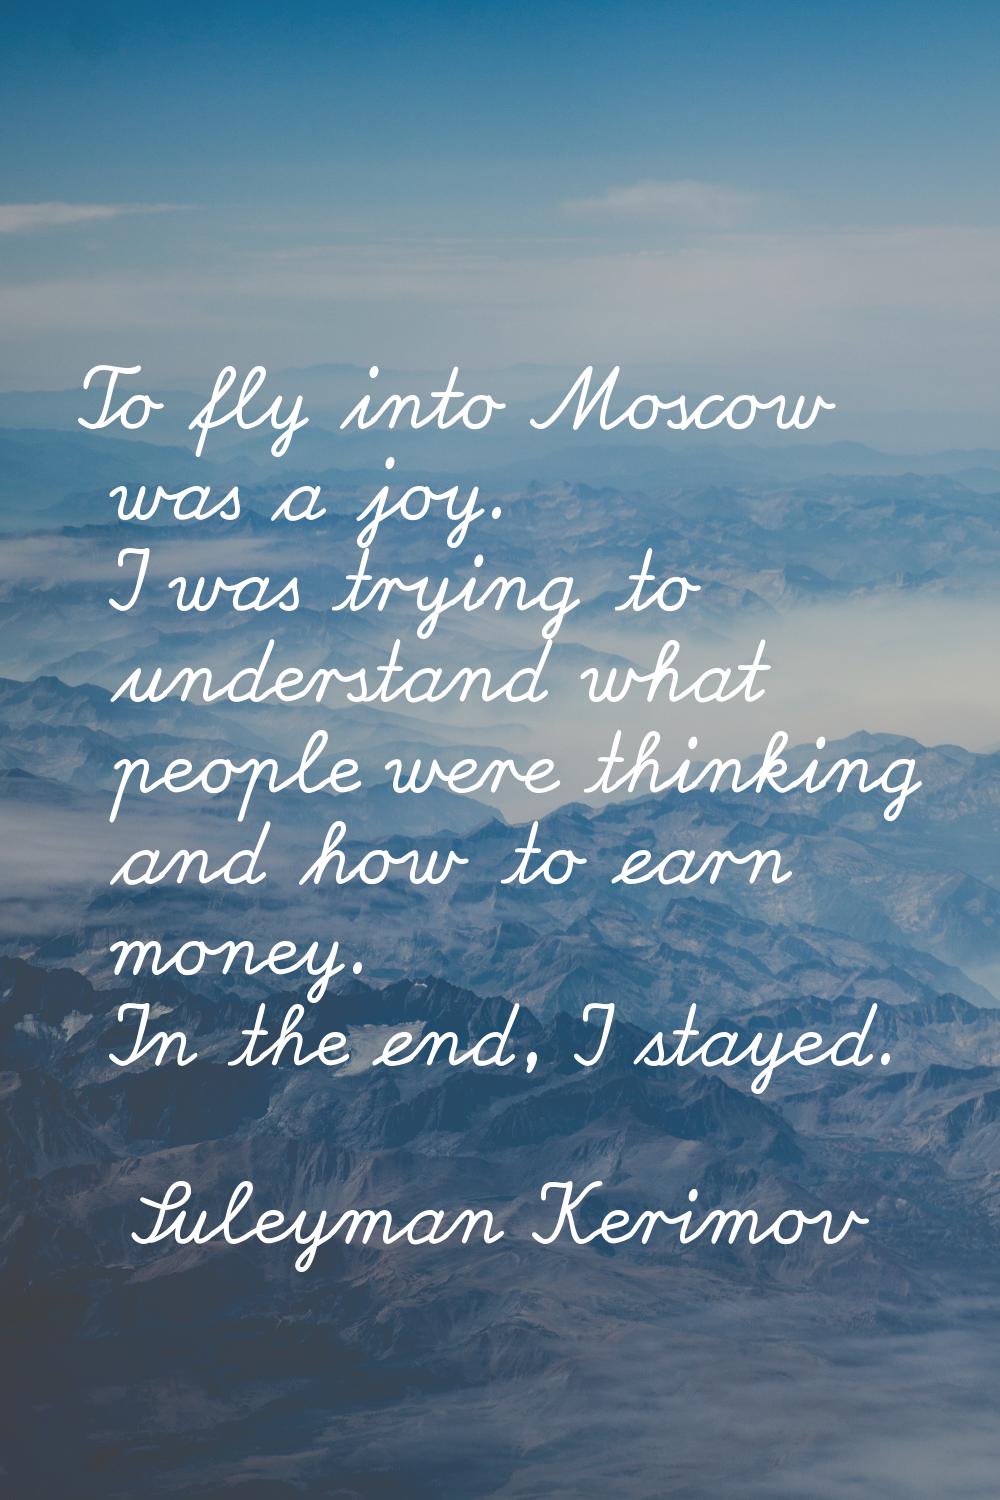 To fly into Moscow was a joy. I was trying to understand what people were thinking and how to earn 